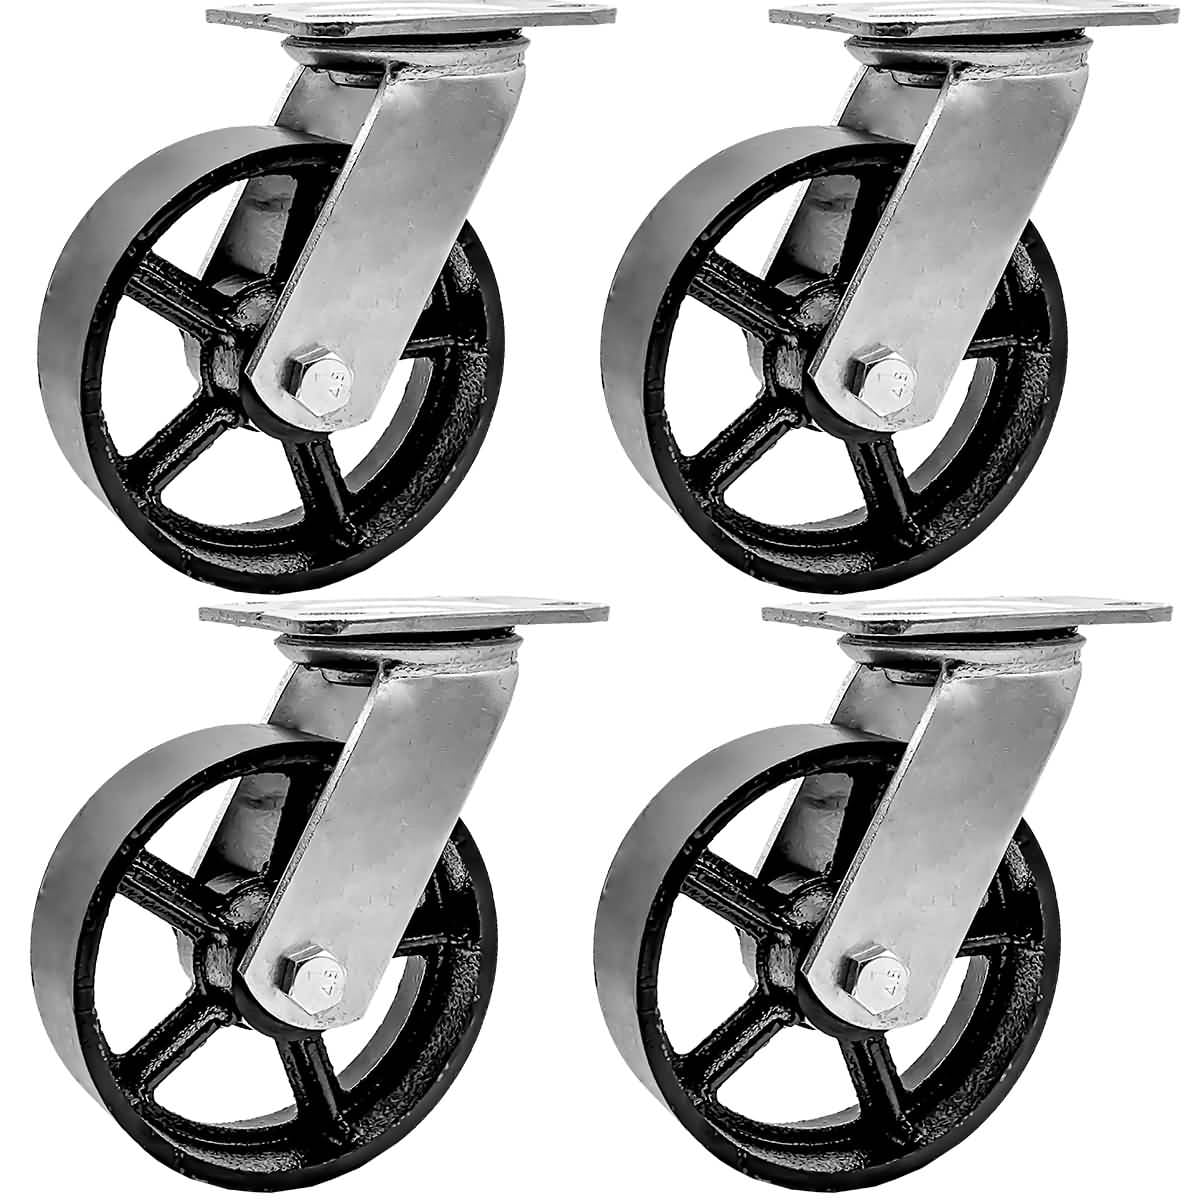 2 plate & 2 w/brake 4 Pack Combo 6" Vintage Caster Wheels Black Iron Casters 